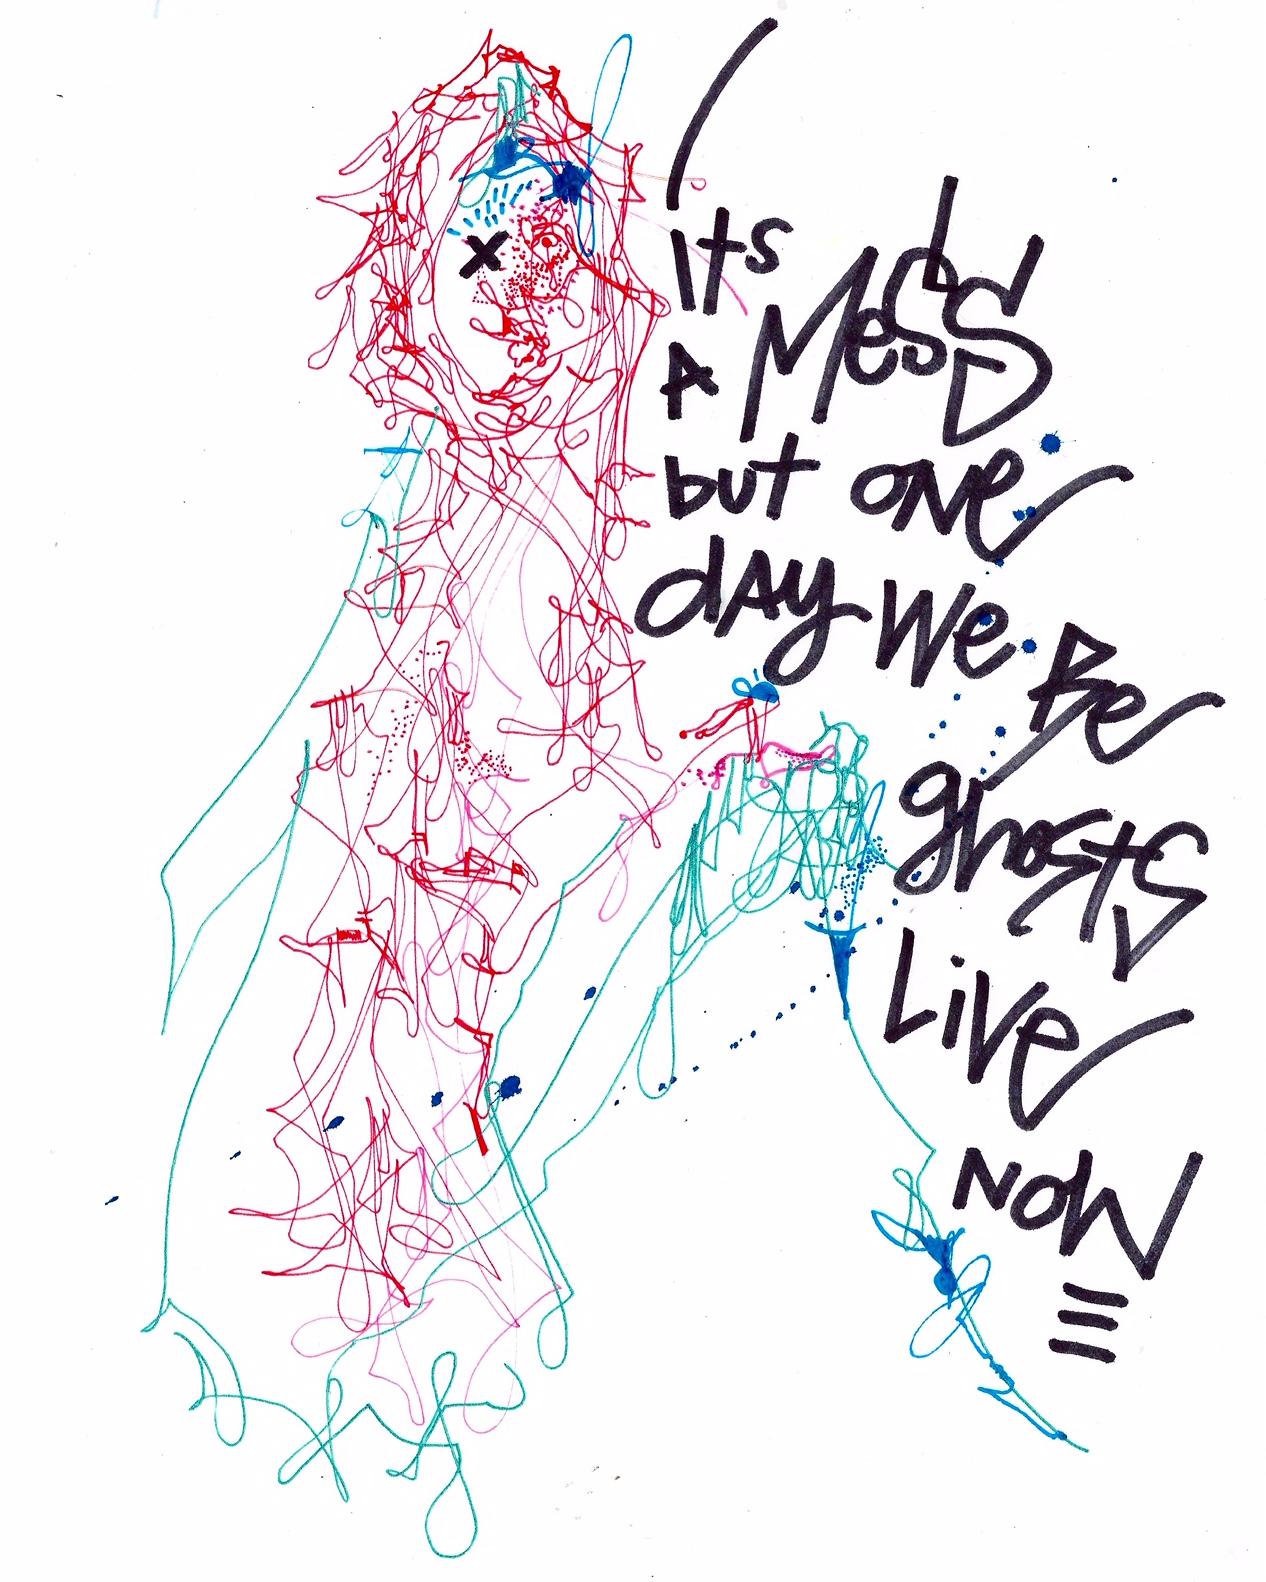 Amerikanische Contemporary Art von M. Alan -It's a Mess but One Day W'll all be Ghosts